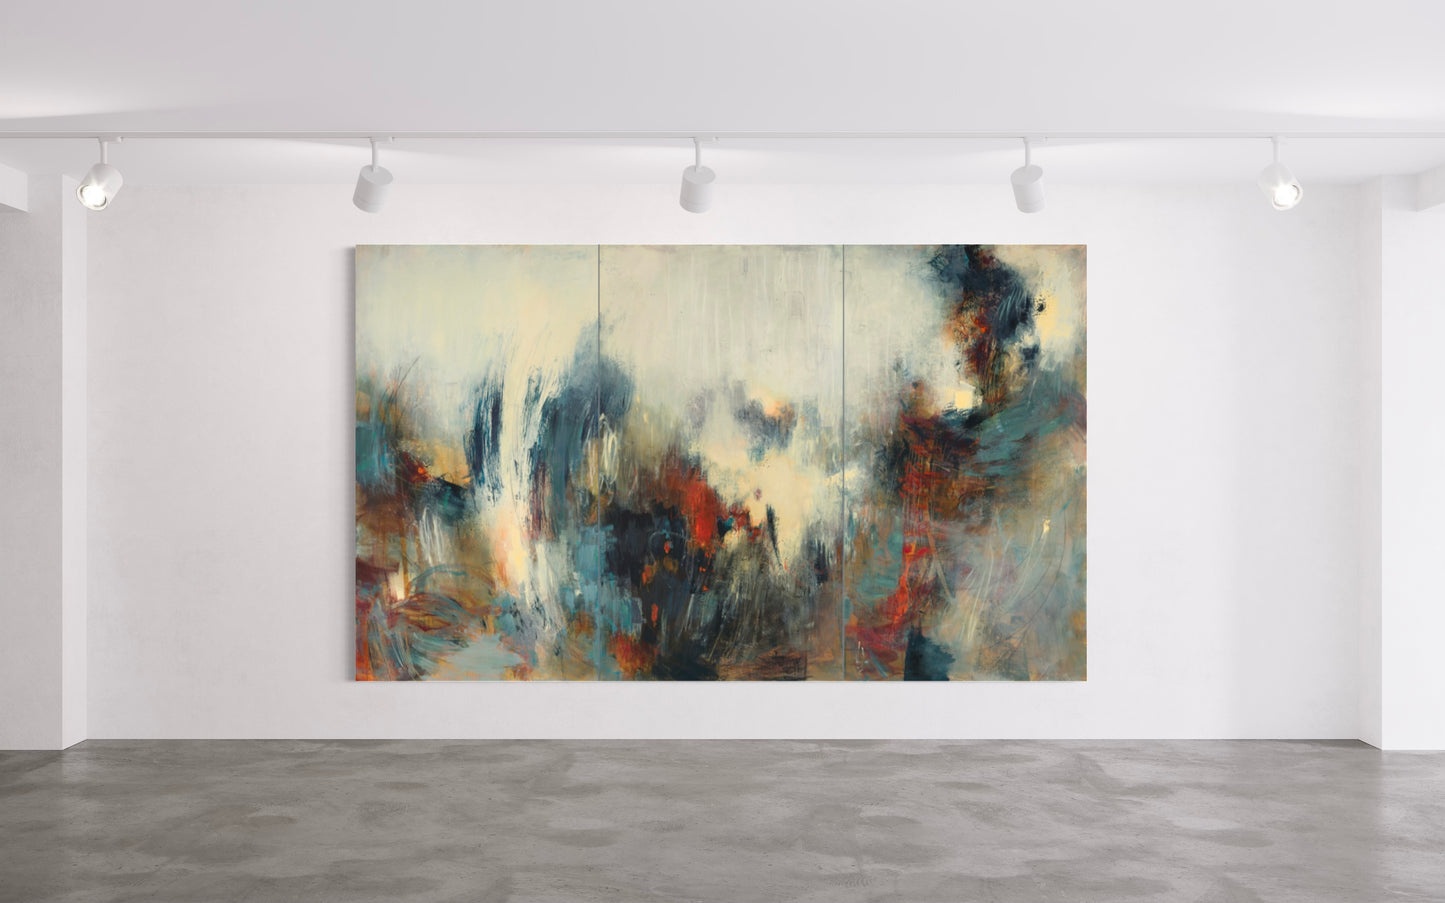 Prelude no. 15 180x300cm (OUT ON RENTAL)